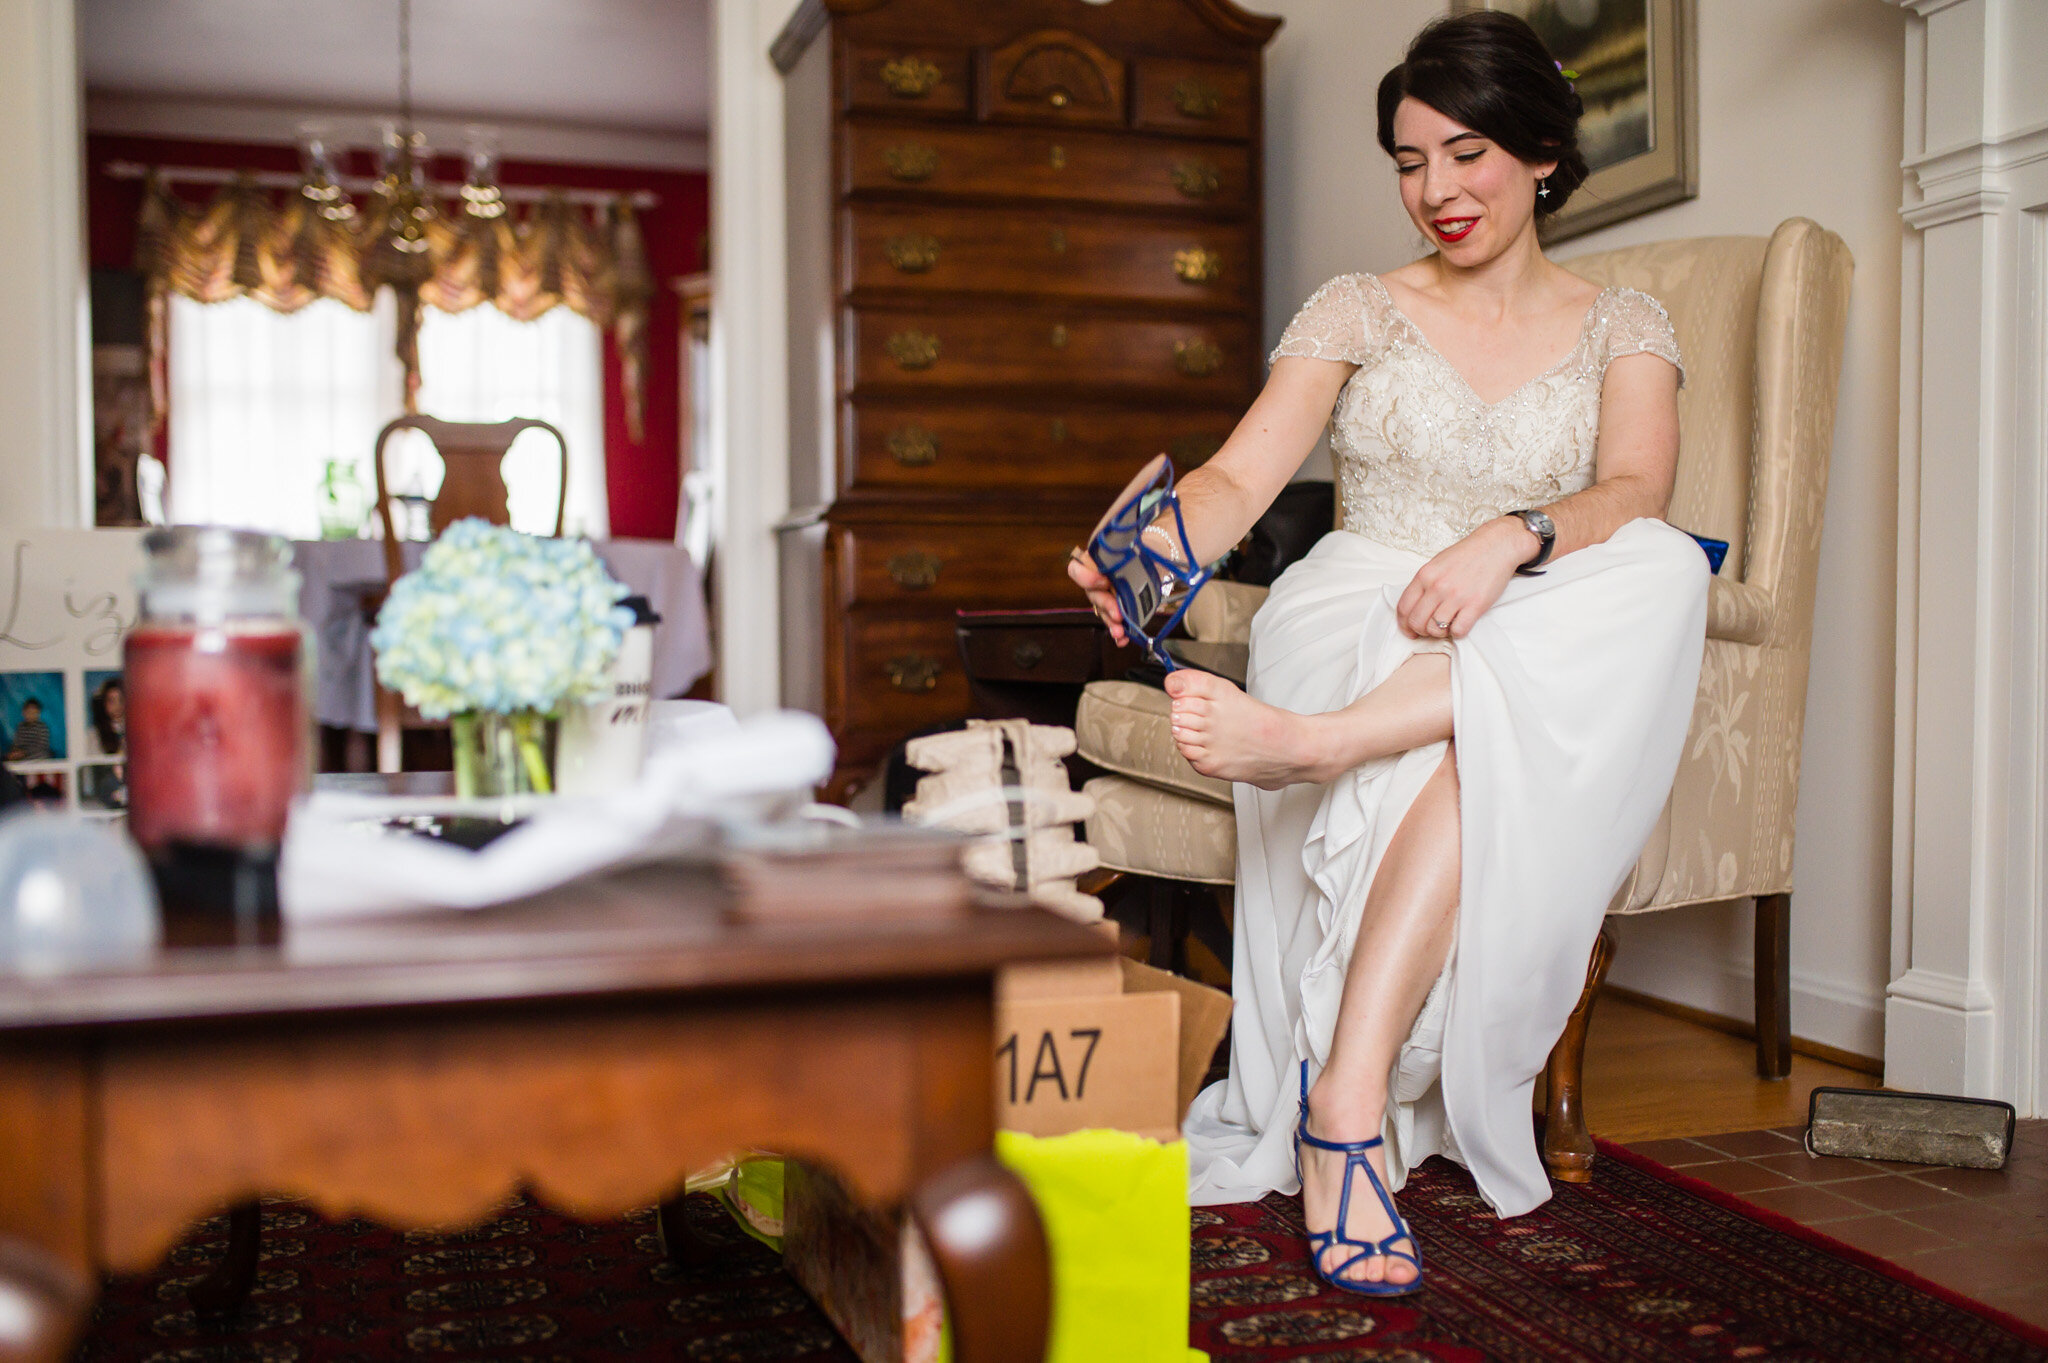 The bride putting on her wedding shoes 